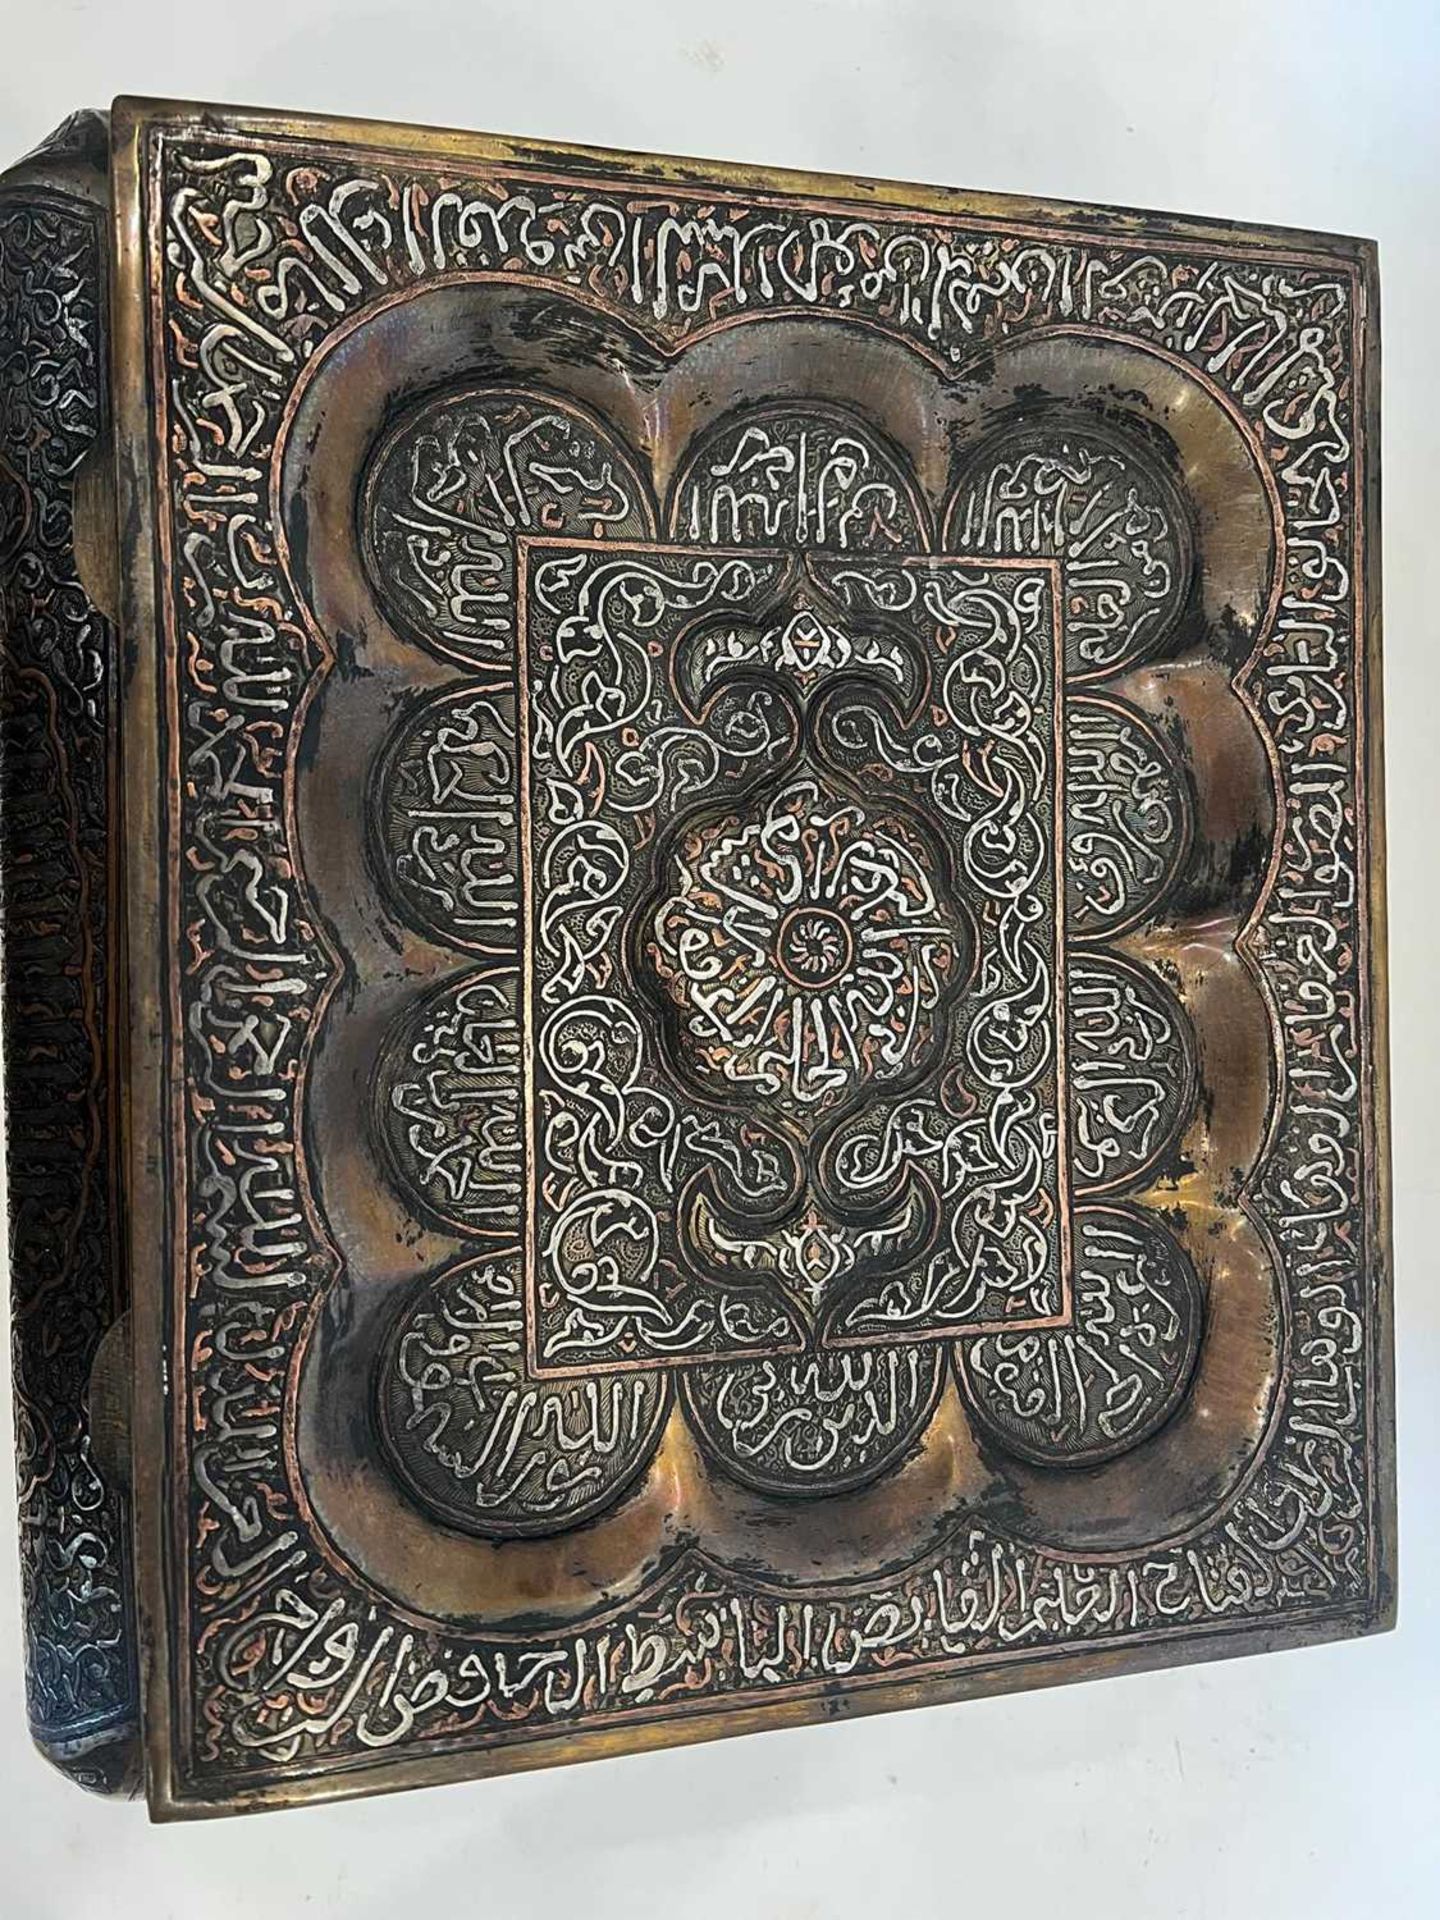 A LARGE EGYPTIAN MAMLUK REVIVAL SILVER AND COPPER INLAID BOX - Image 6 of 6